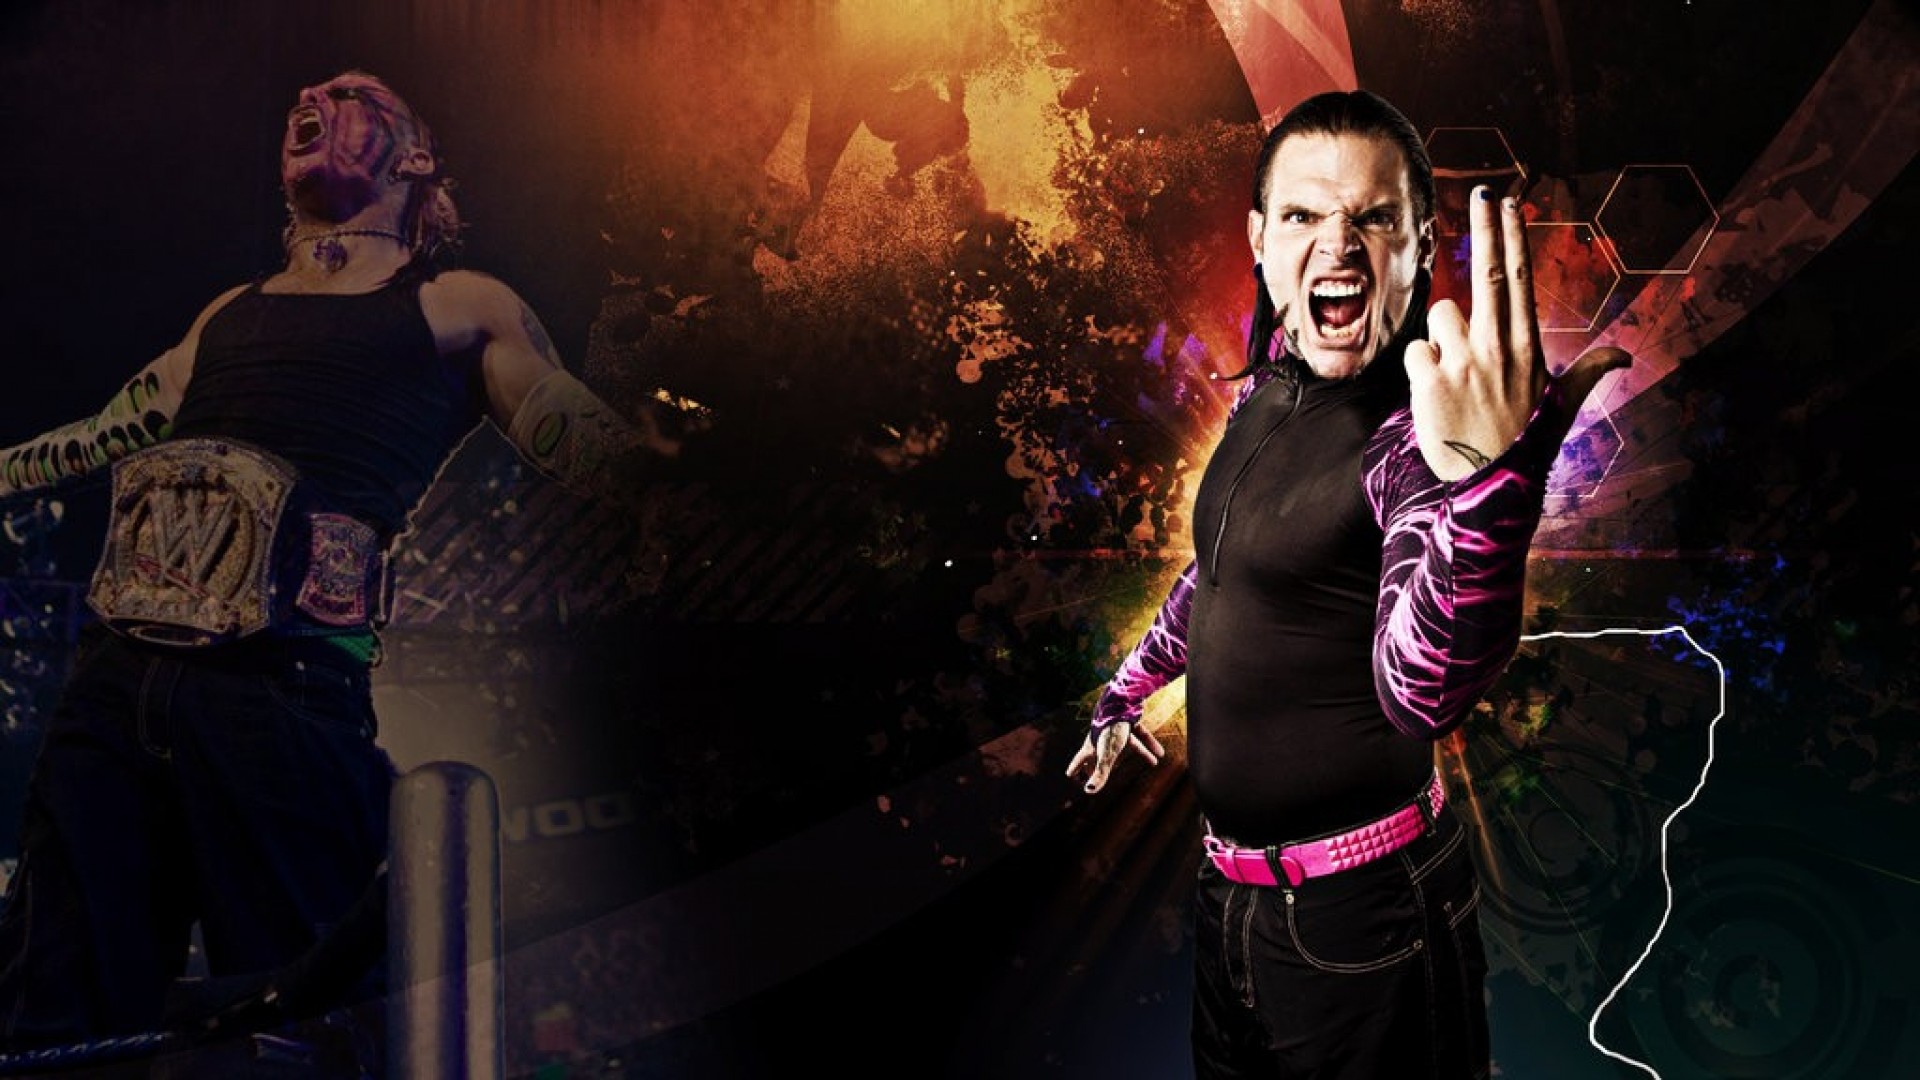 1920x1080 Jeff Hardy Wallpapers Free Download | Epic Car Wallpapers